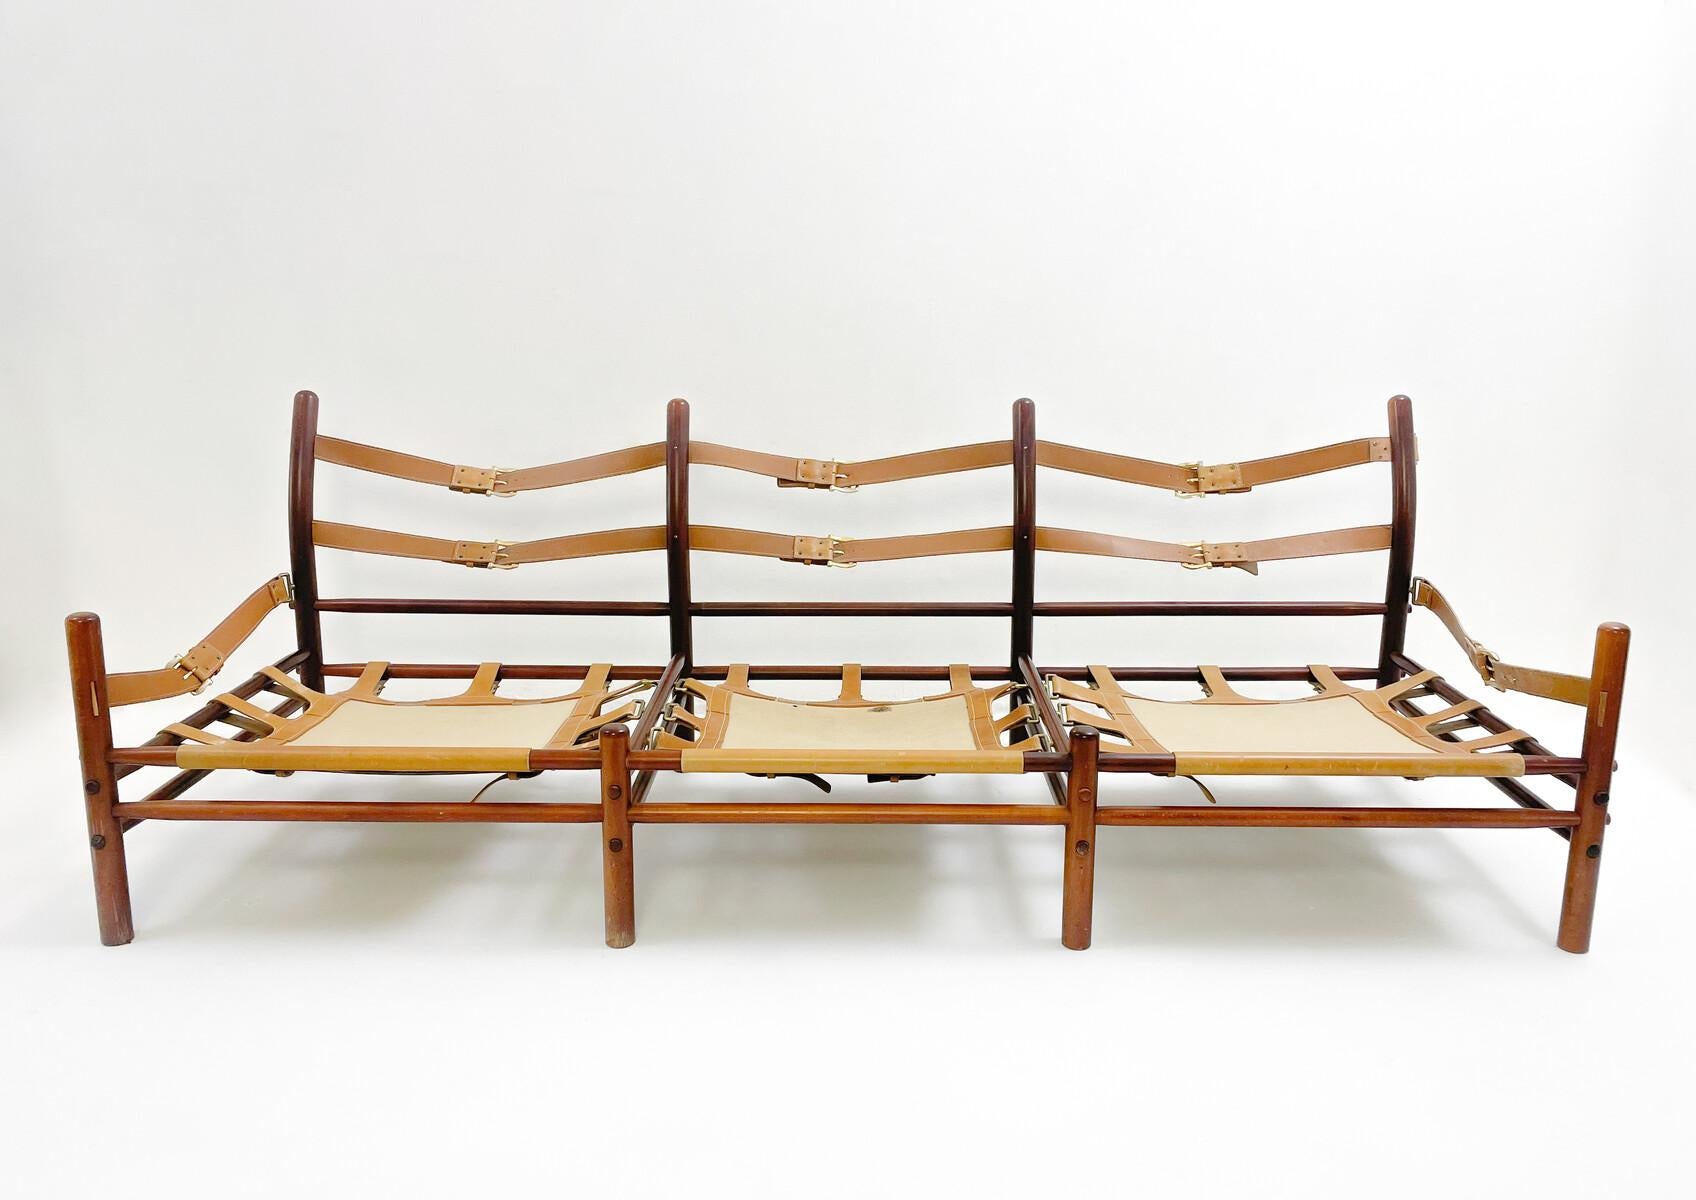 Swedish Mid-Century Modern Kontiki Three-Seater Sofa by Arne Norell, Sweden, 1960s For Sale